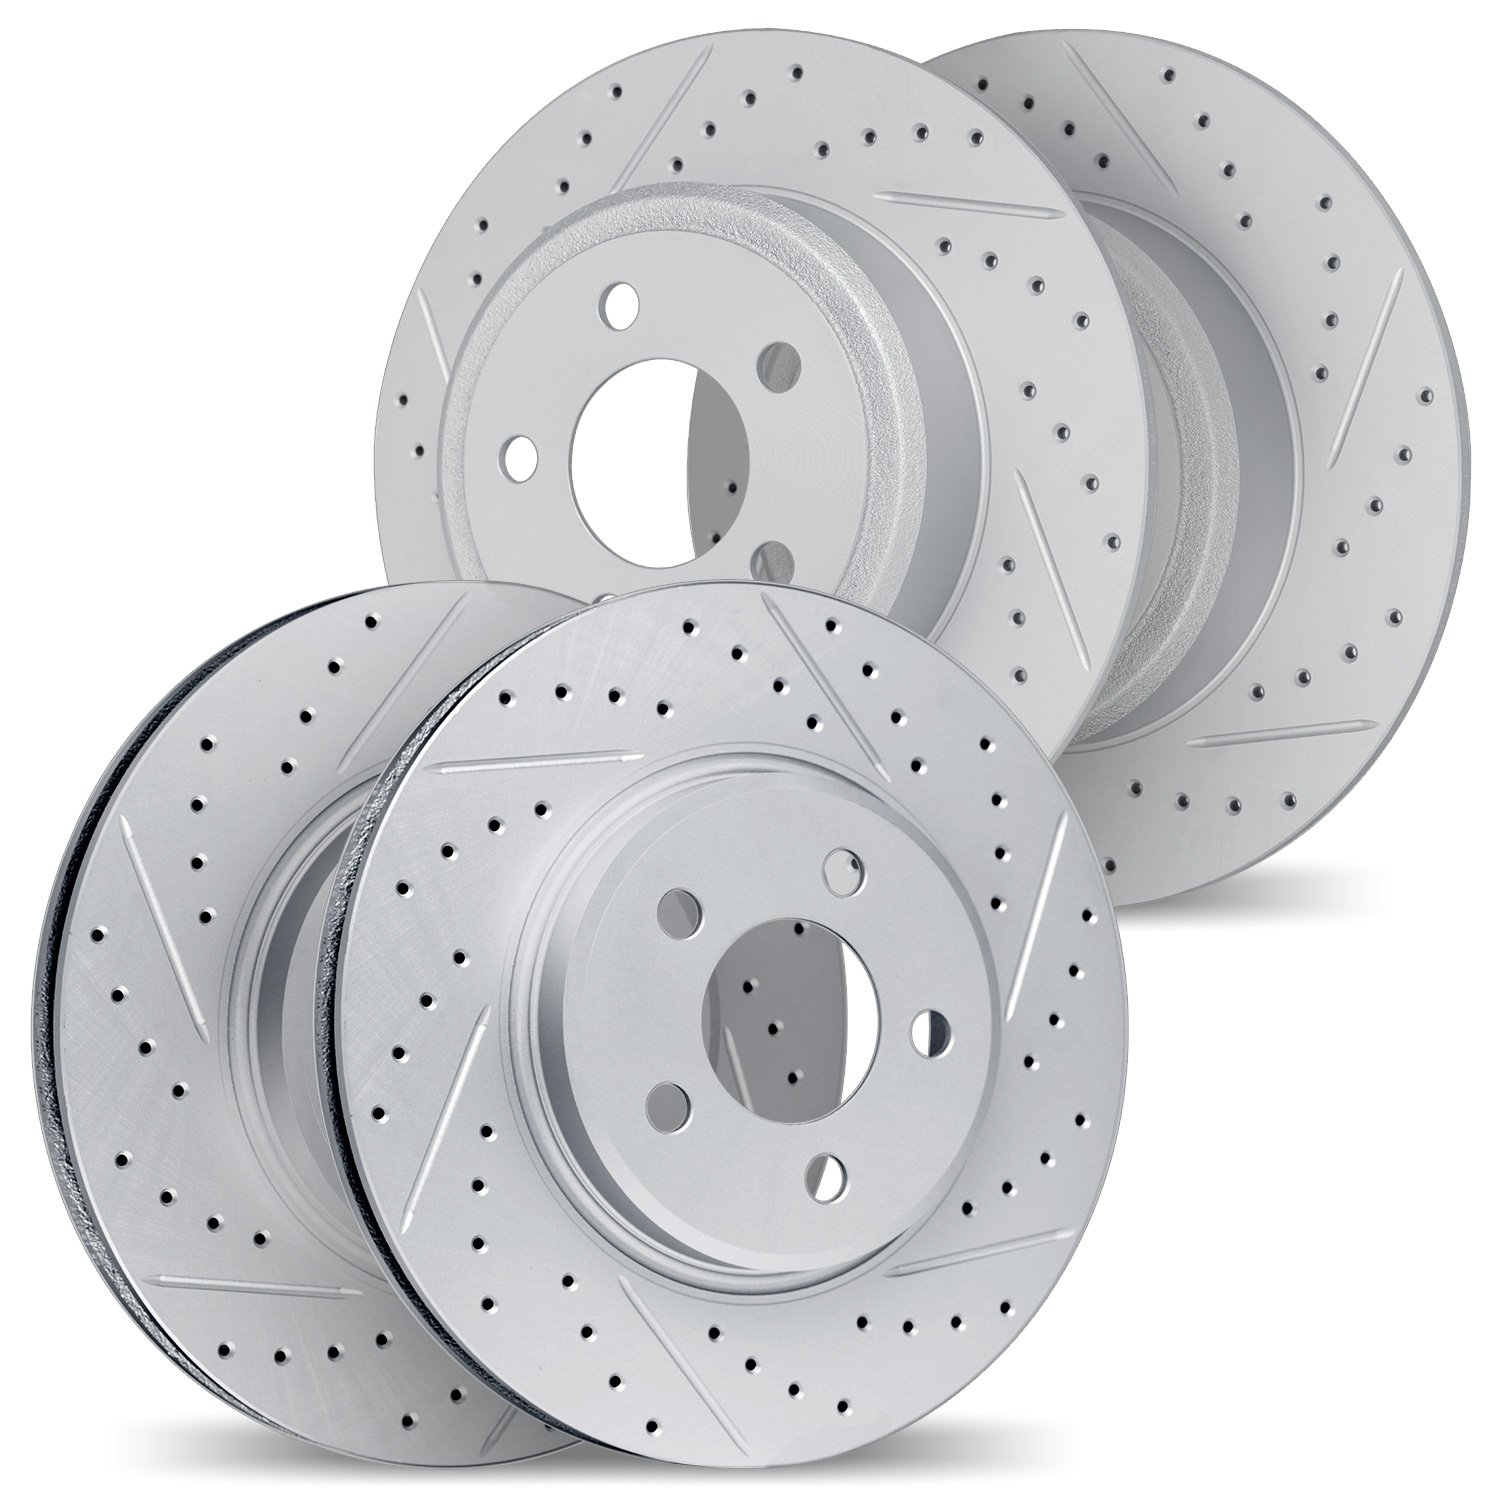 2004-76034 Geoperformance Drilled/Slotted Brake Rotors, 1992-1996 Lexus/Toyota/Scion, Position: Front and Rear